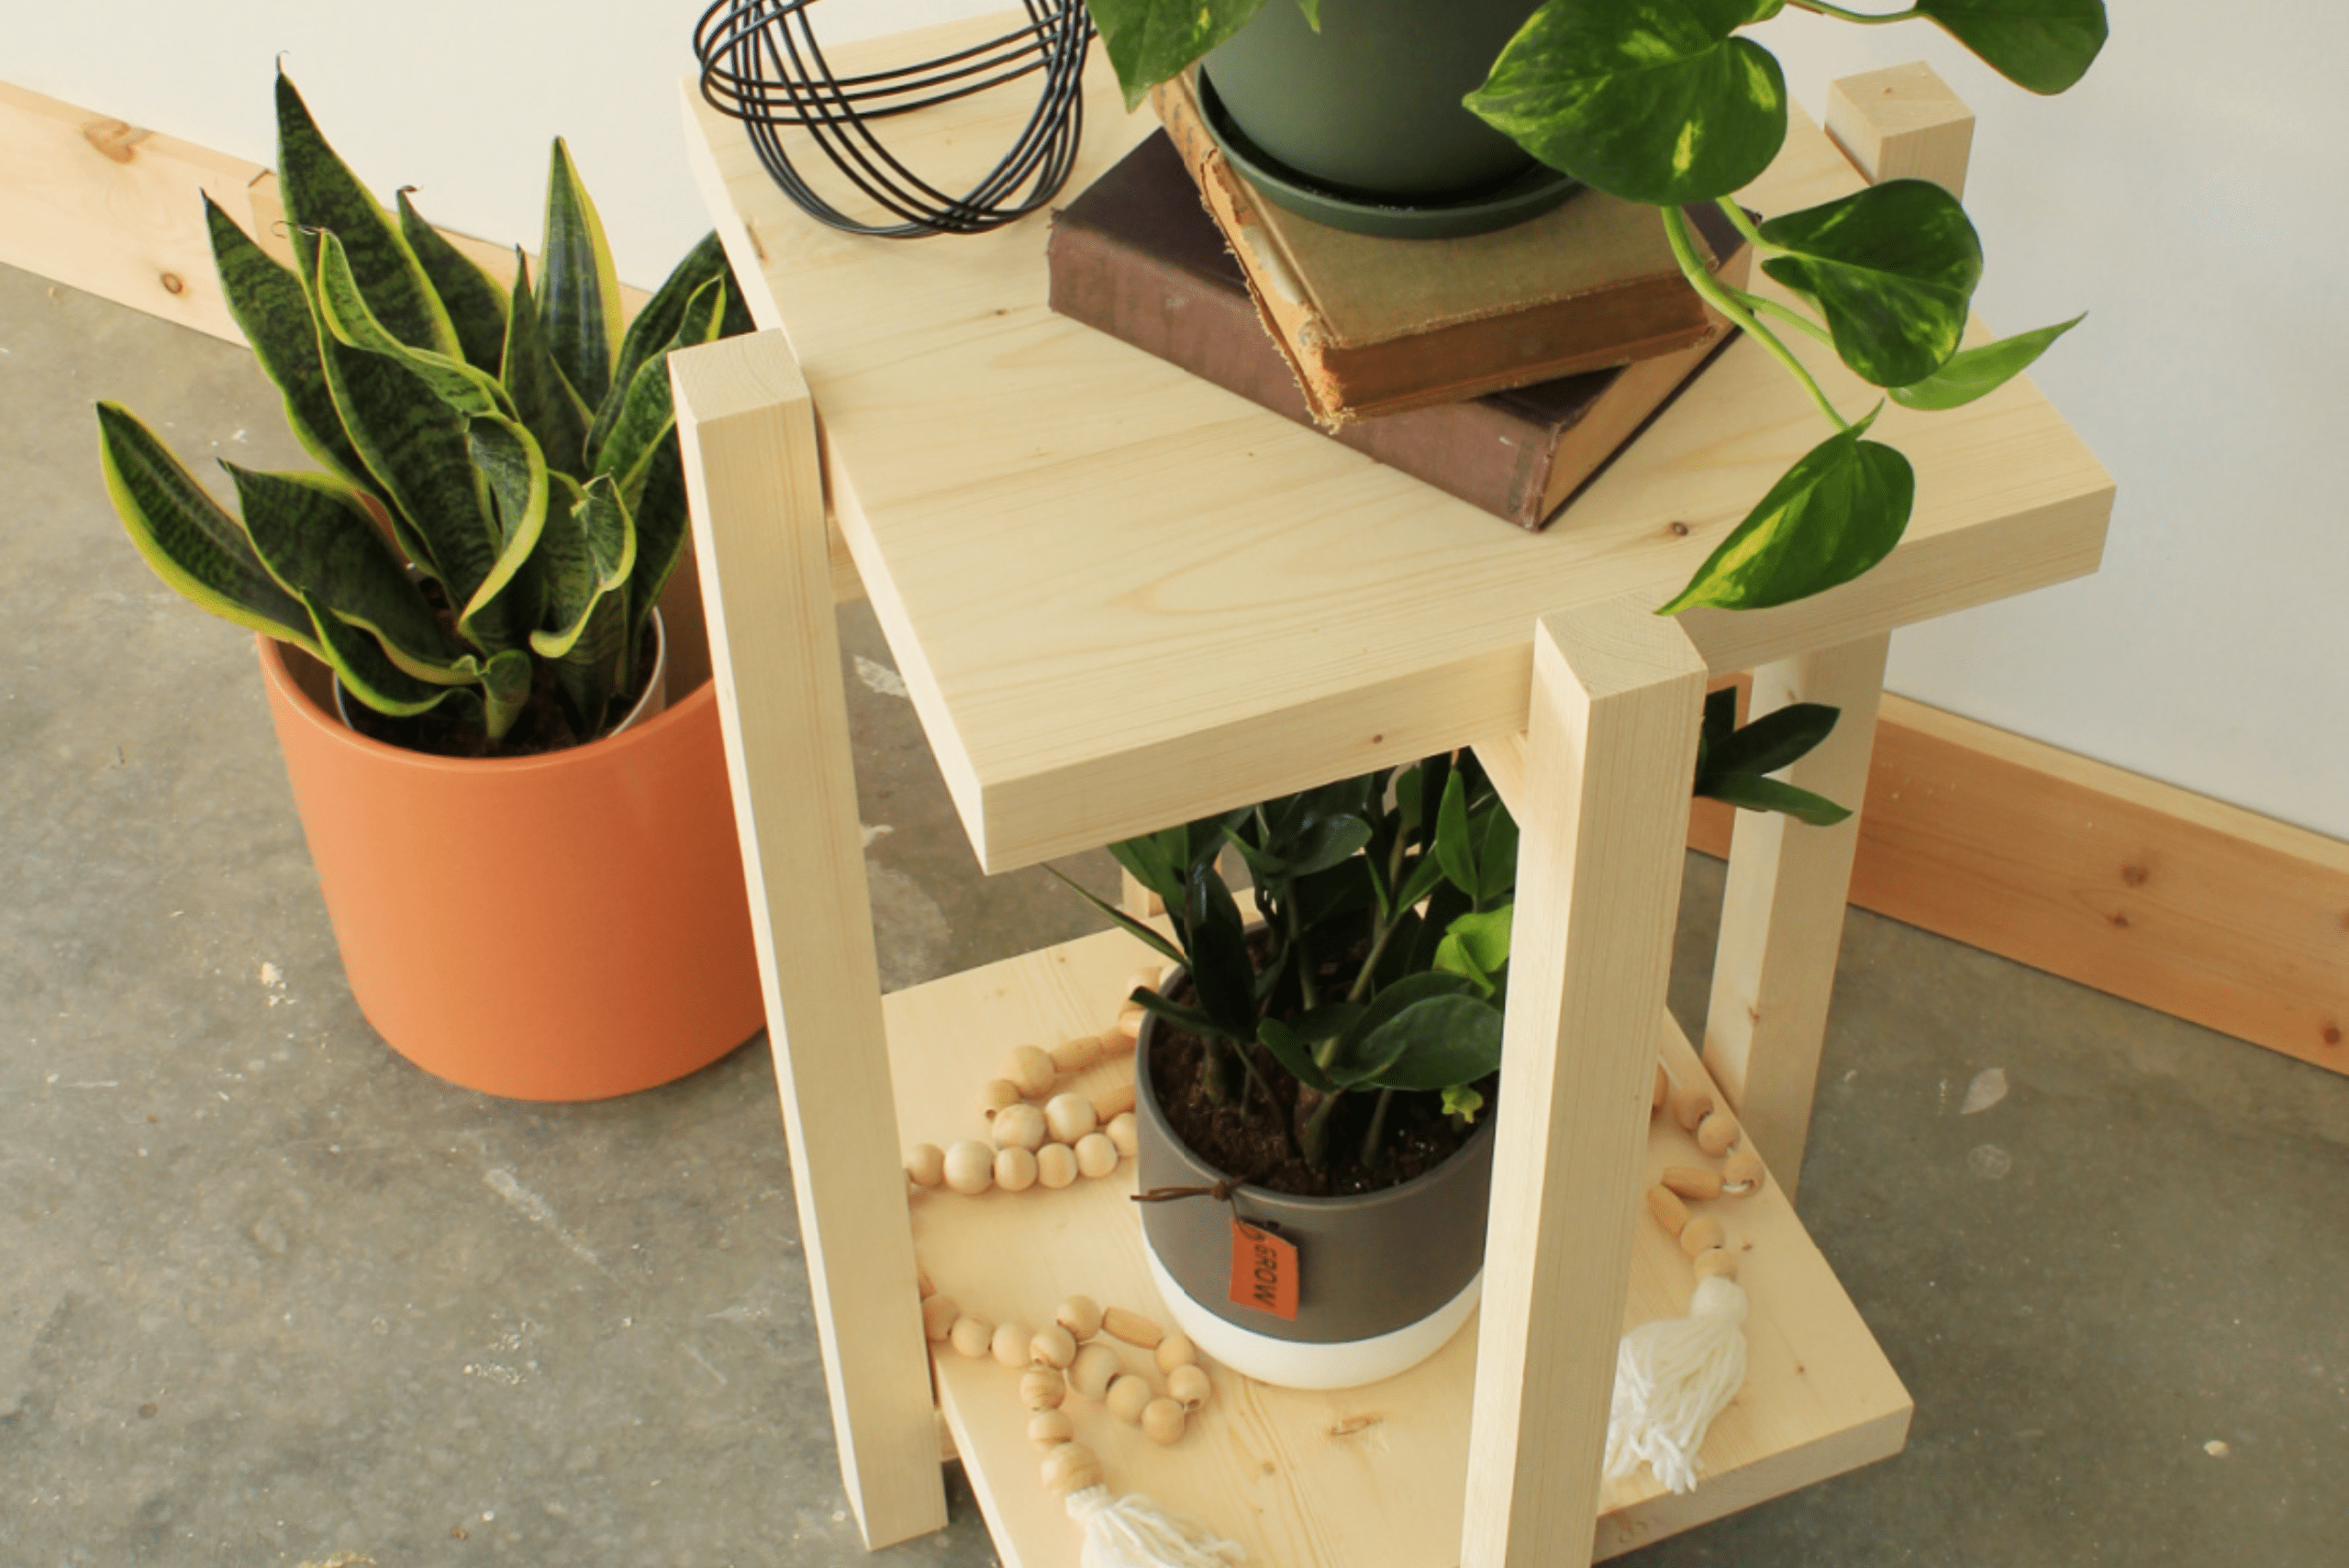 Unfinished wooden plant stand with two levels holding potted plants.